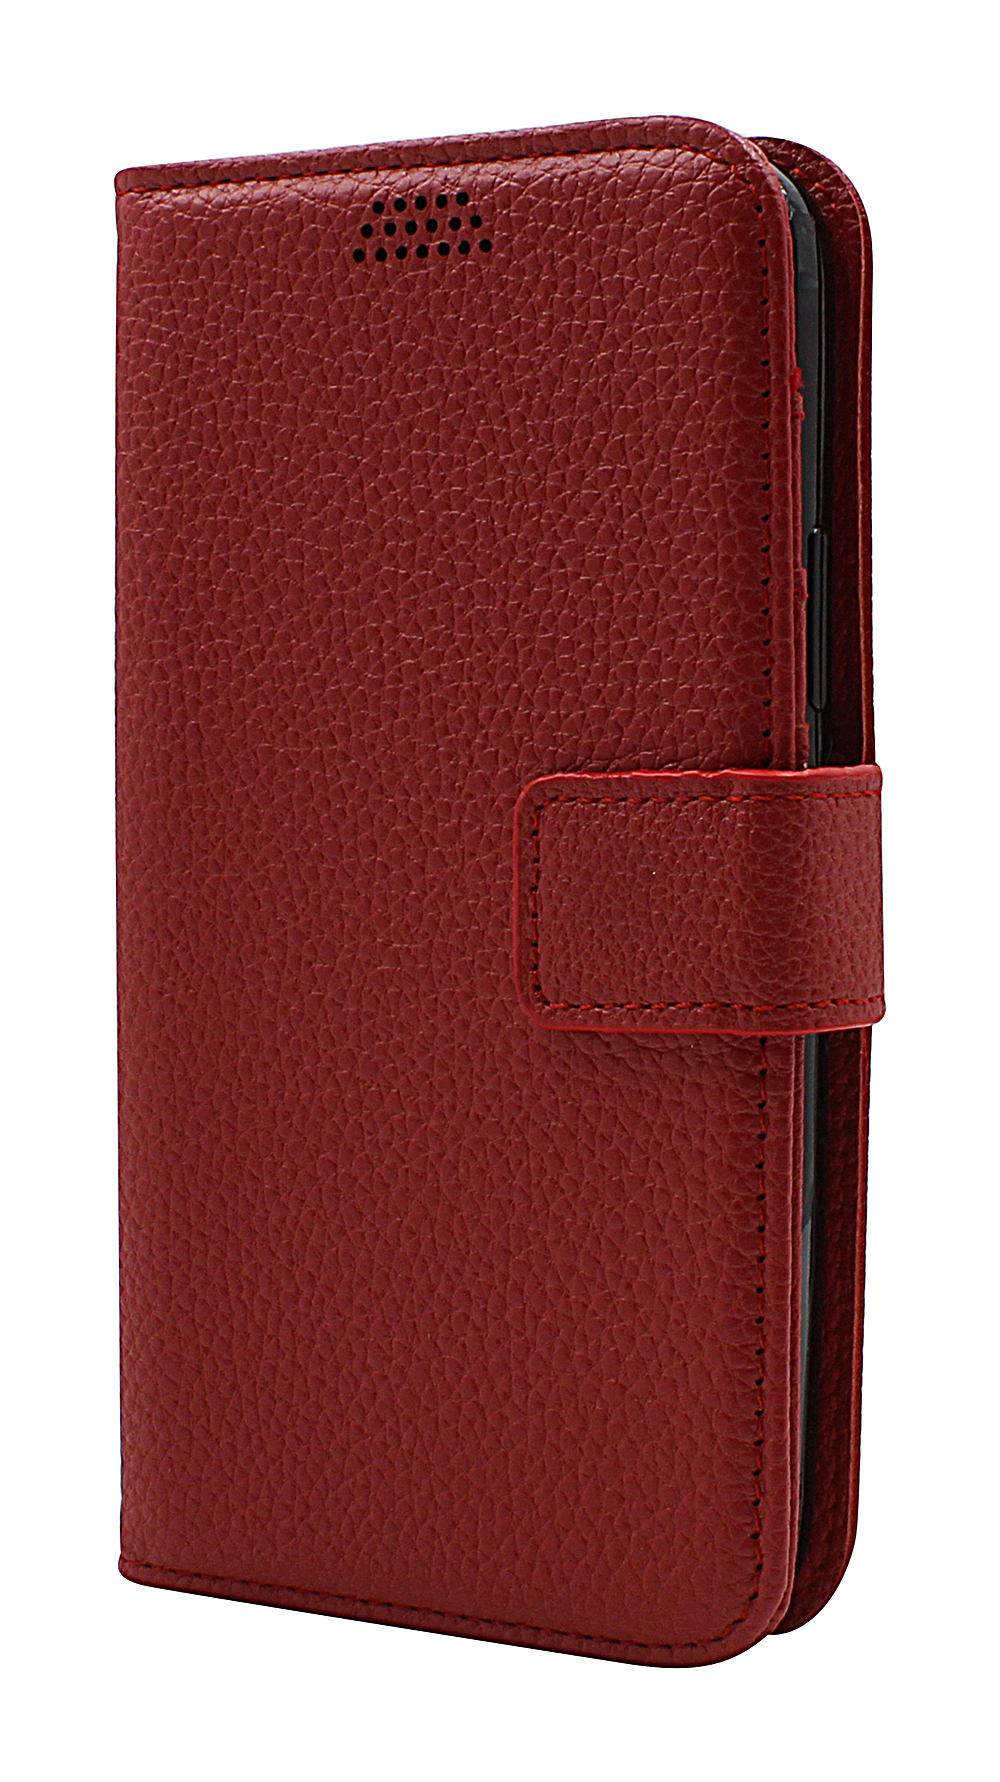 New Standcase Wallet iPhone 12 (6.1)